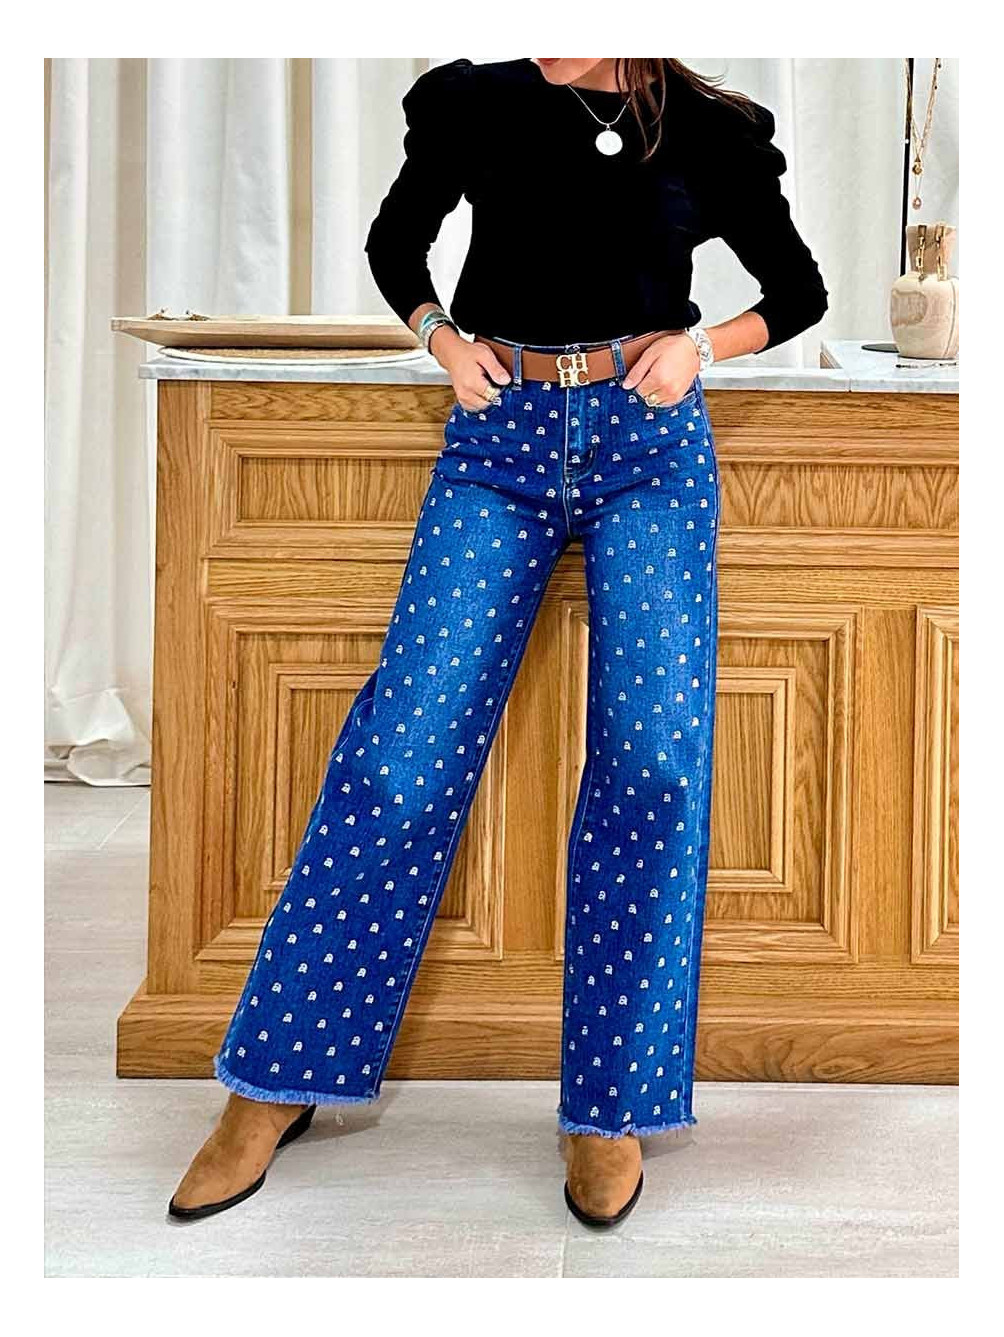 Jeans Strass, Jeans Mujer, Pantalón Mujer, Mariquita Trasquilá